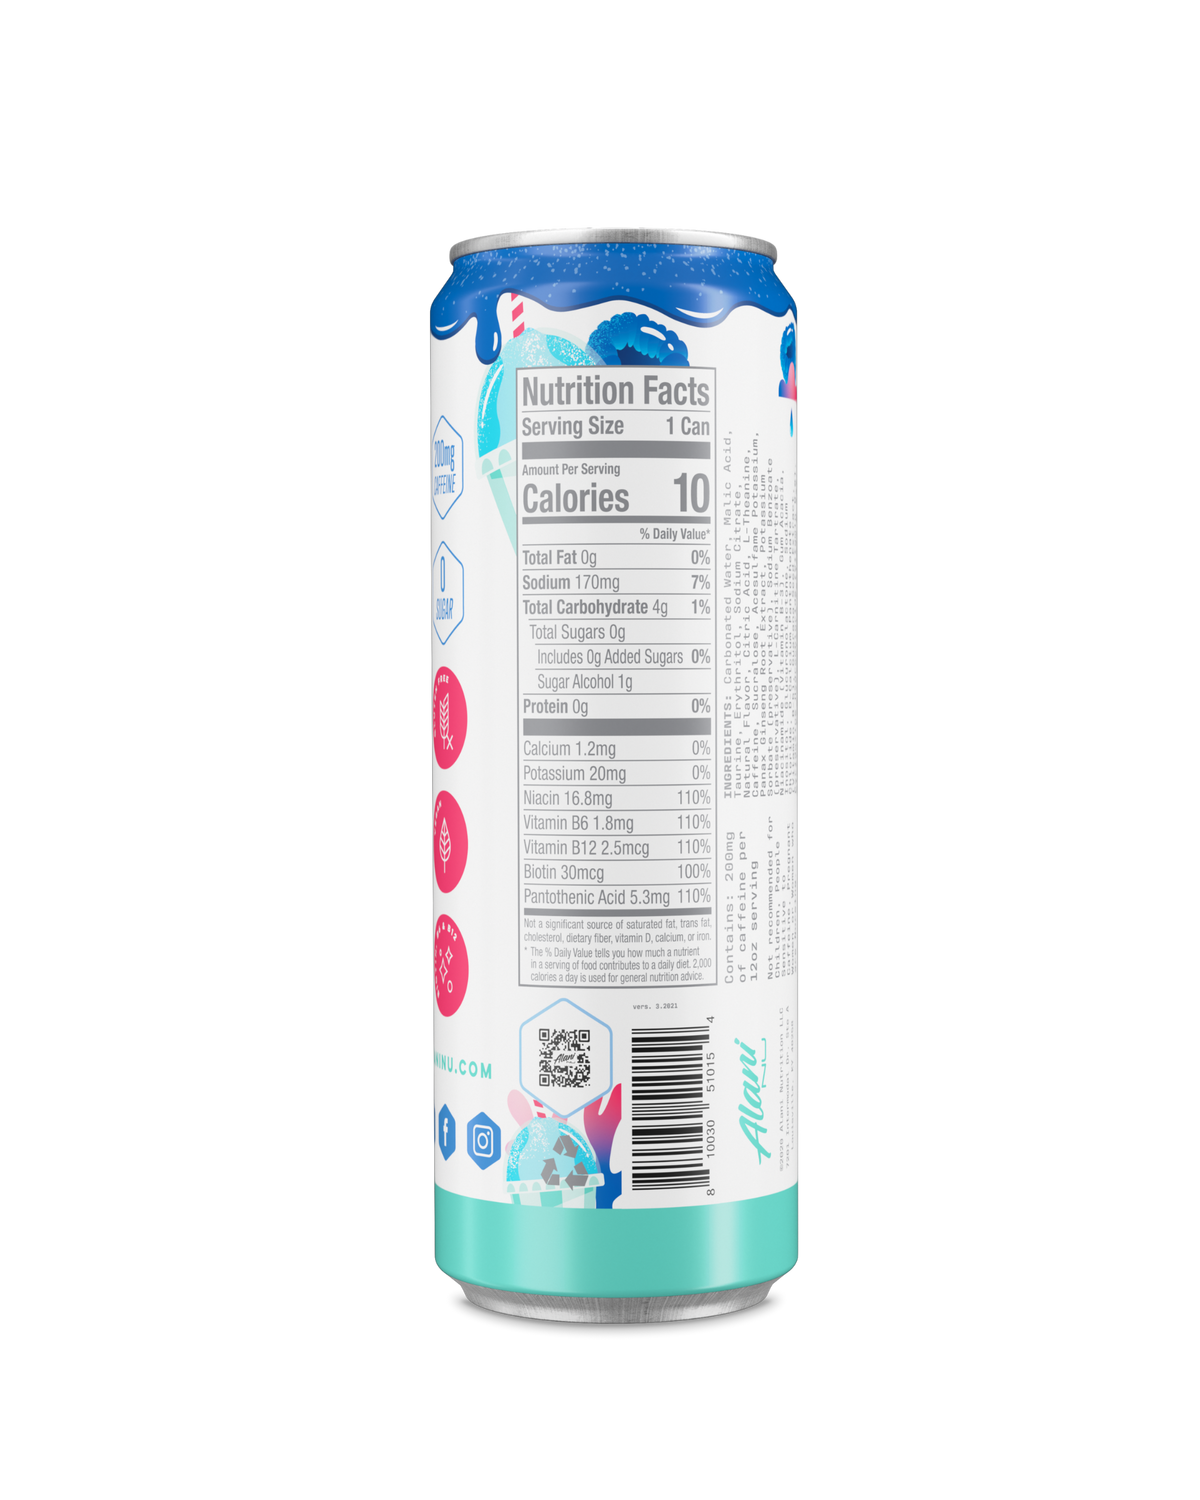 A Energy Drink in Blue Slush flavor highlighting nutrition facts.